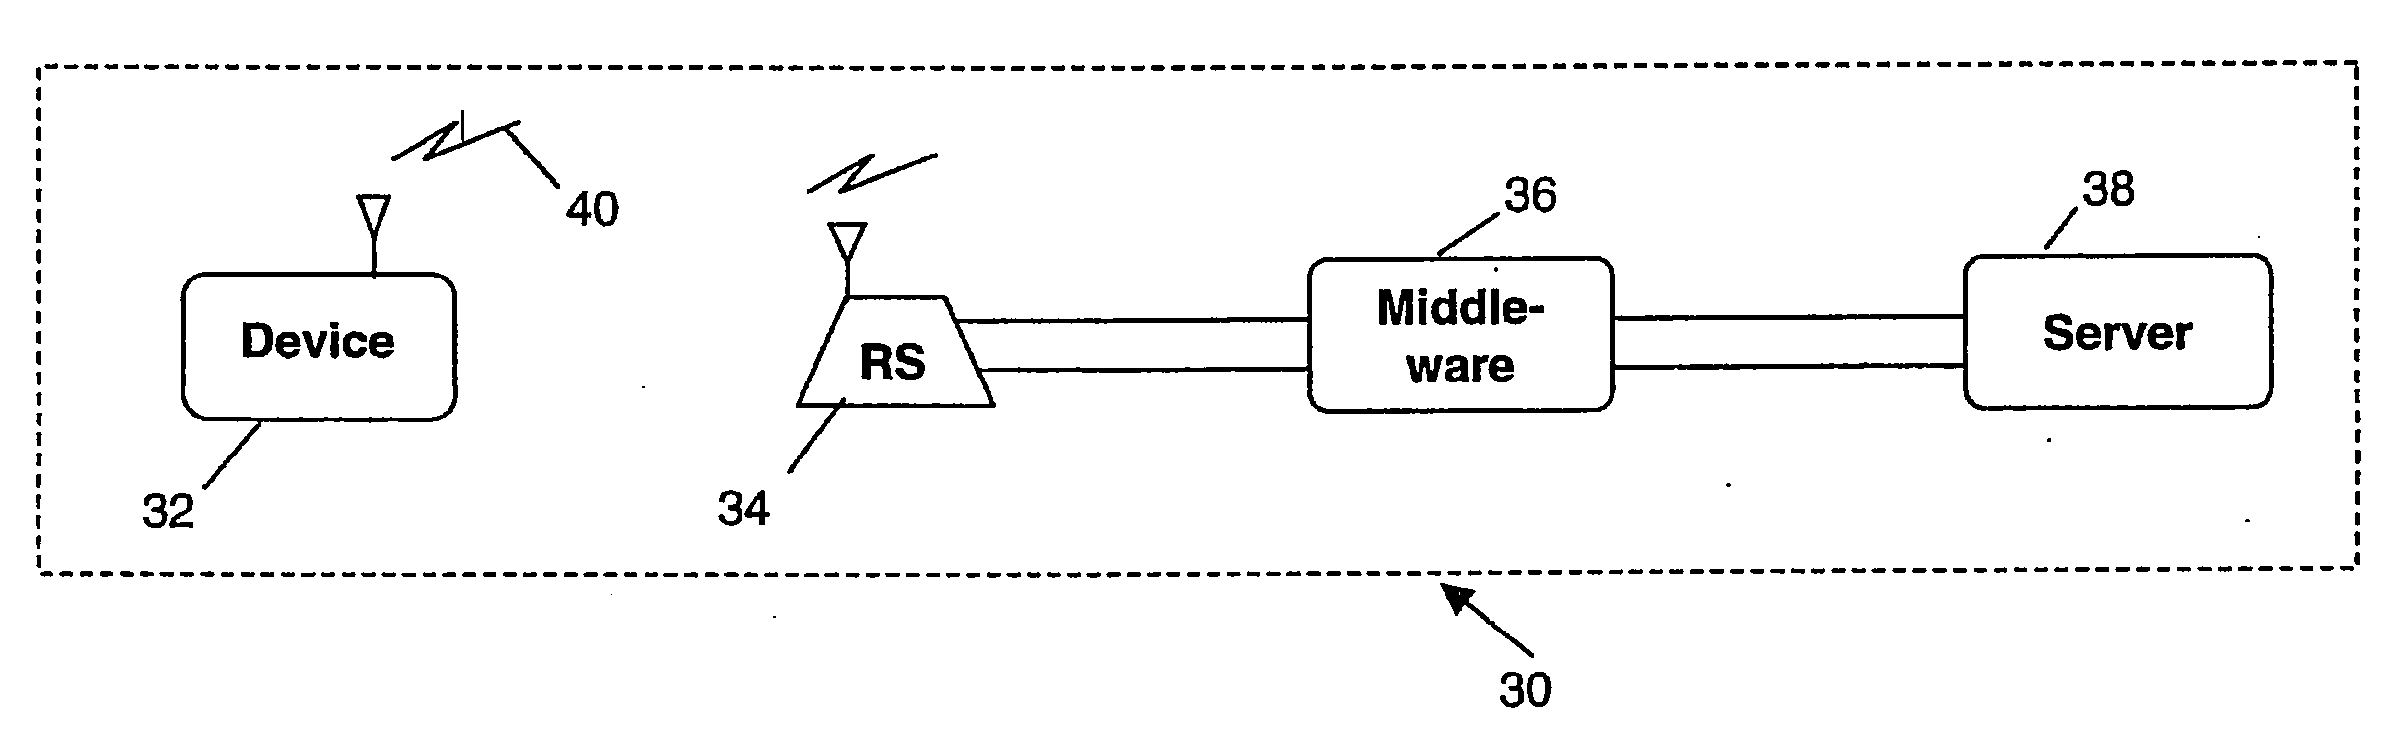 Method and Apparatus for Remotely Monitoring the Condition of a Patient